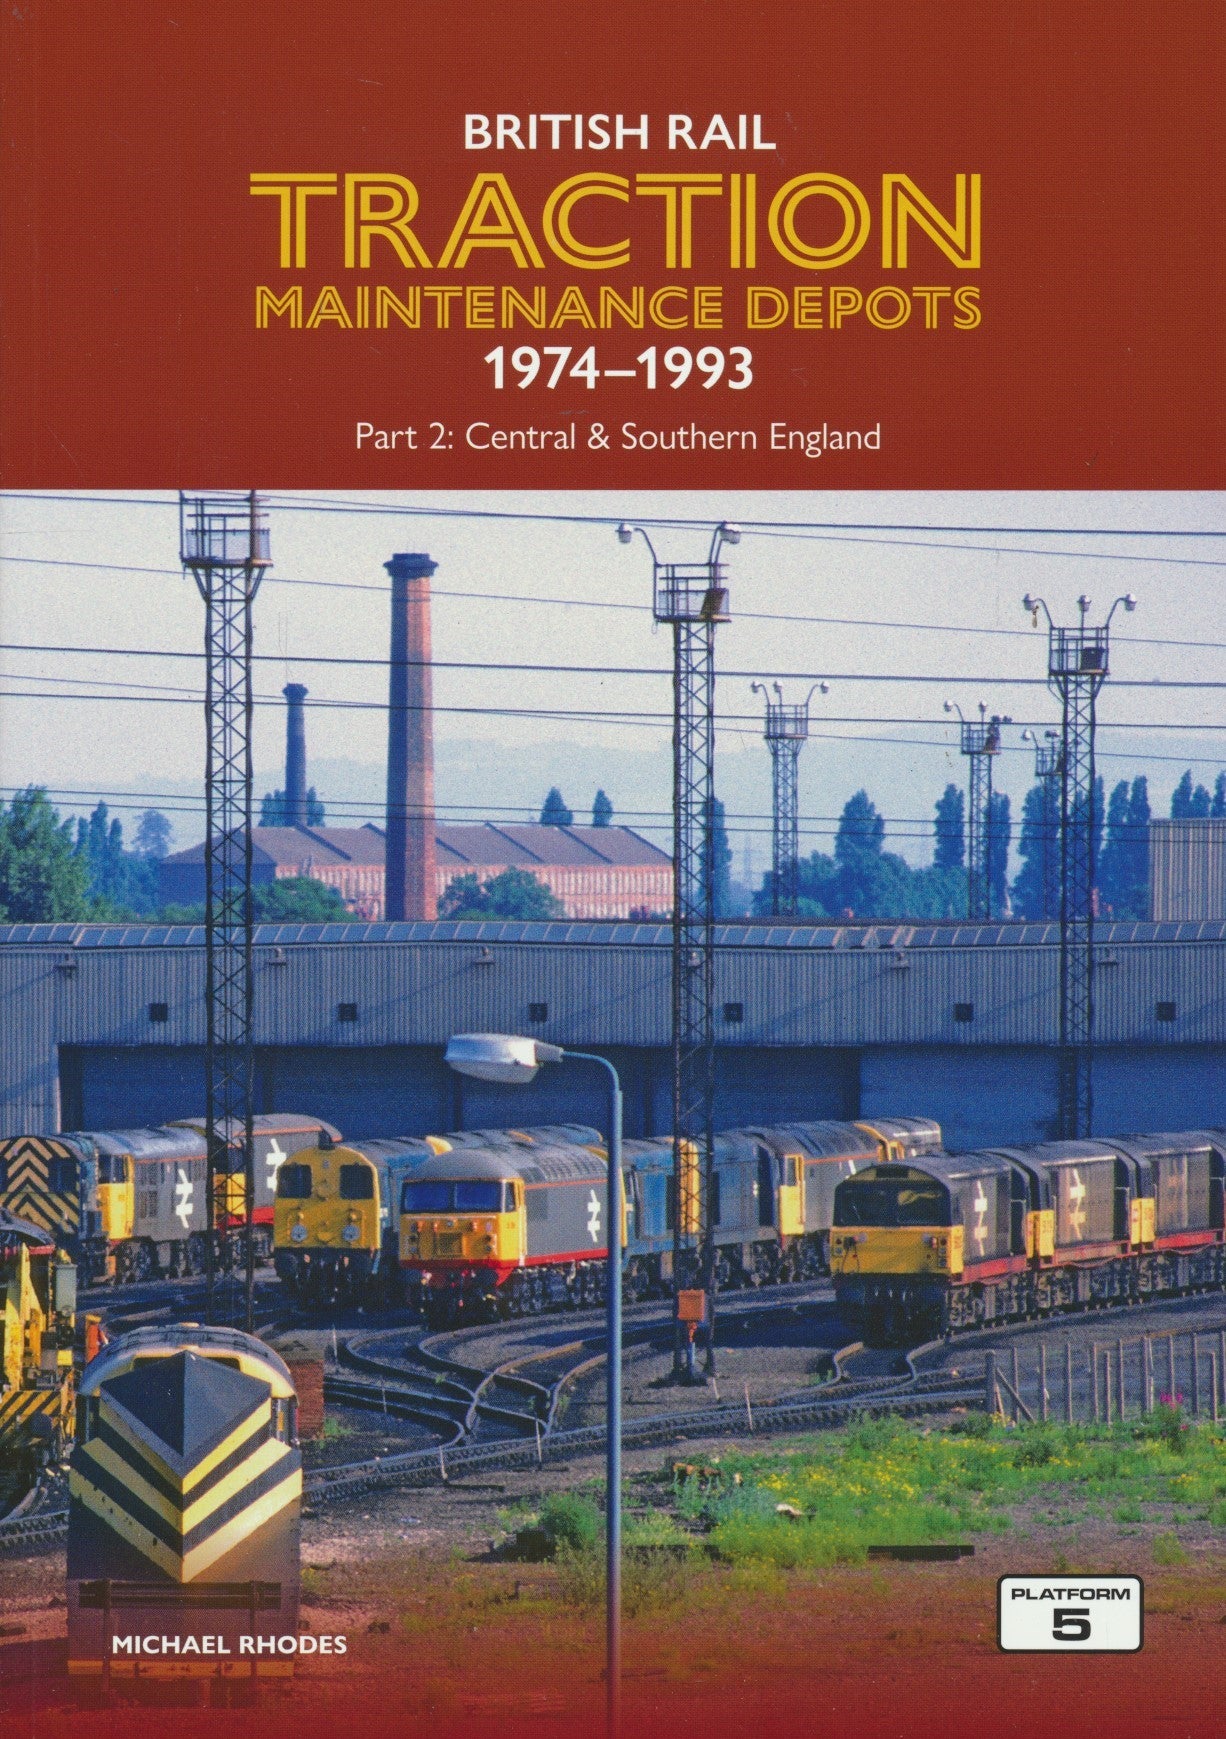 British Rail Traction Maintenance Depots 1974-1993 Part 2: Central & Southern England